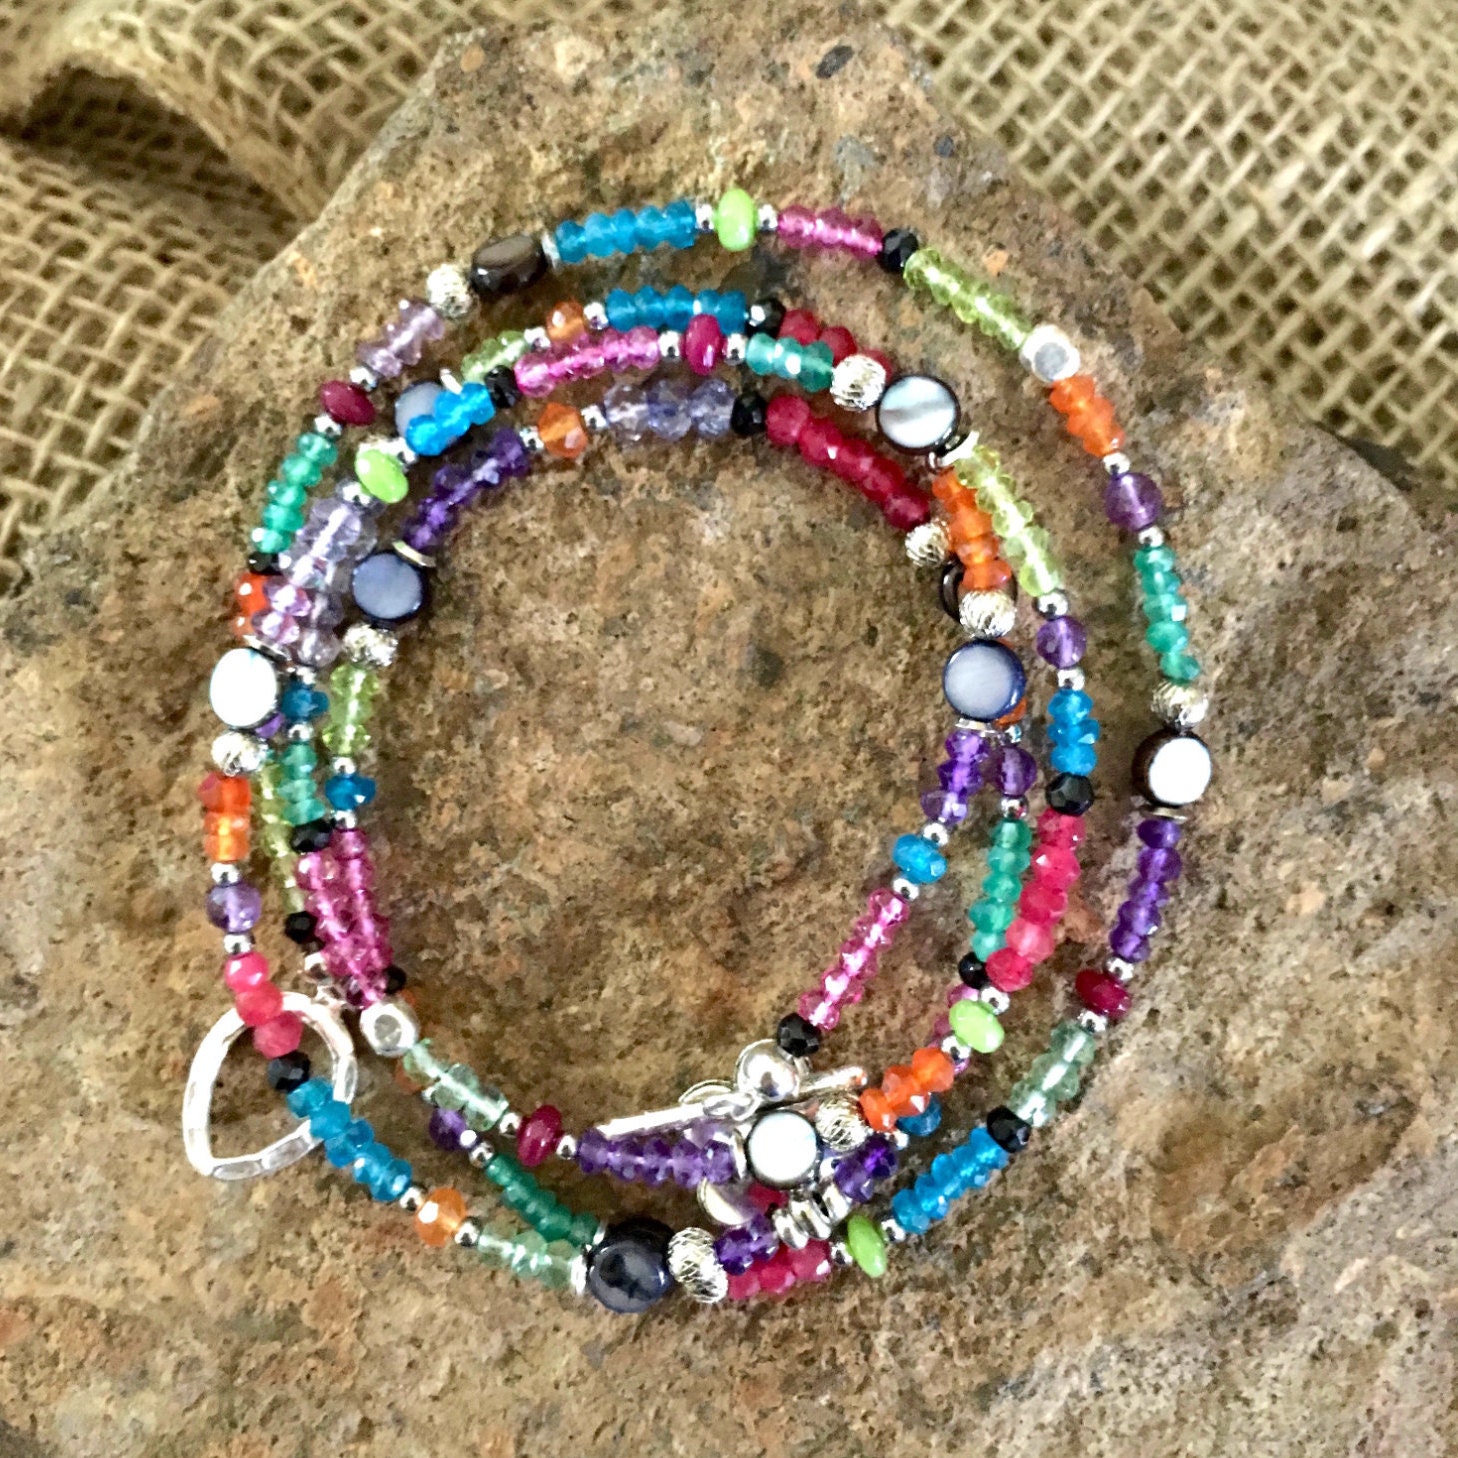 Colorful Gemstone Wrap Bracelet or Necklace with Sterling